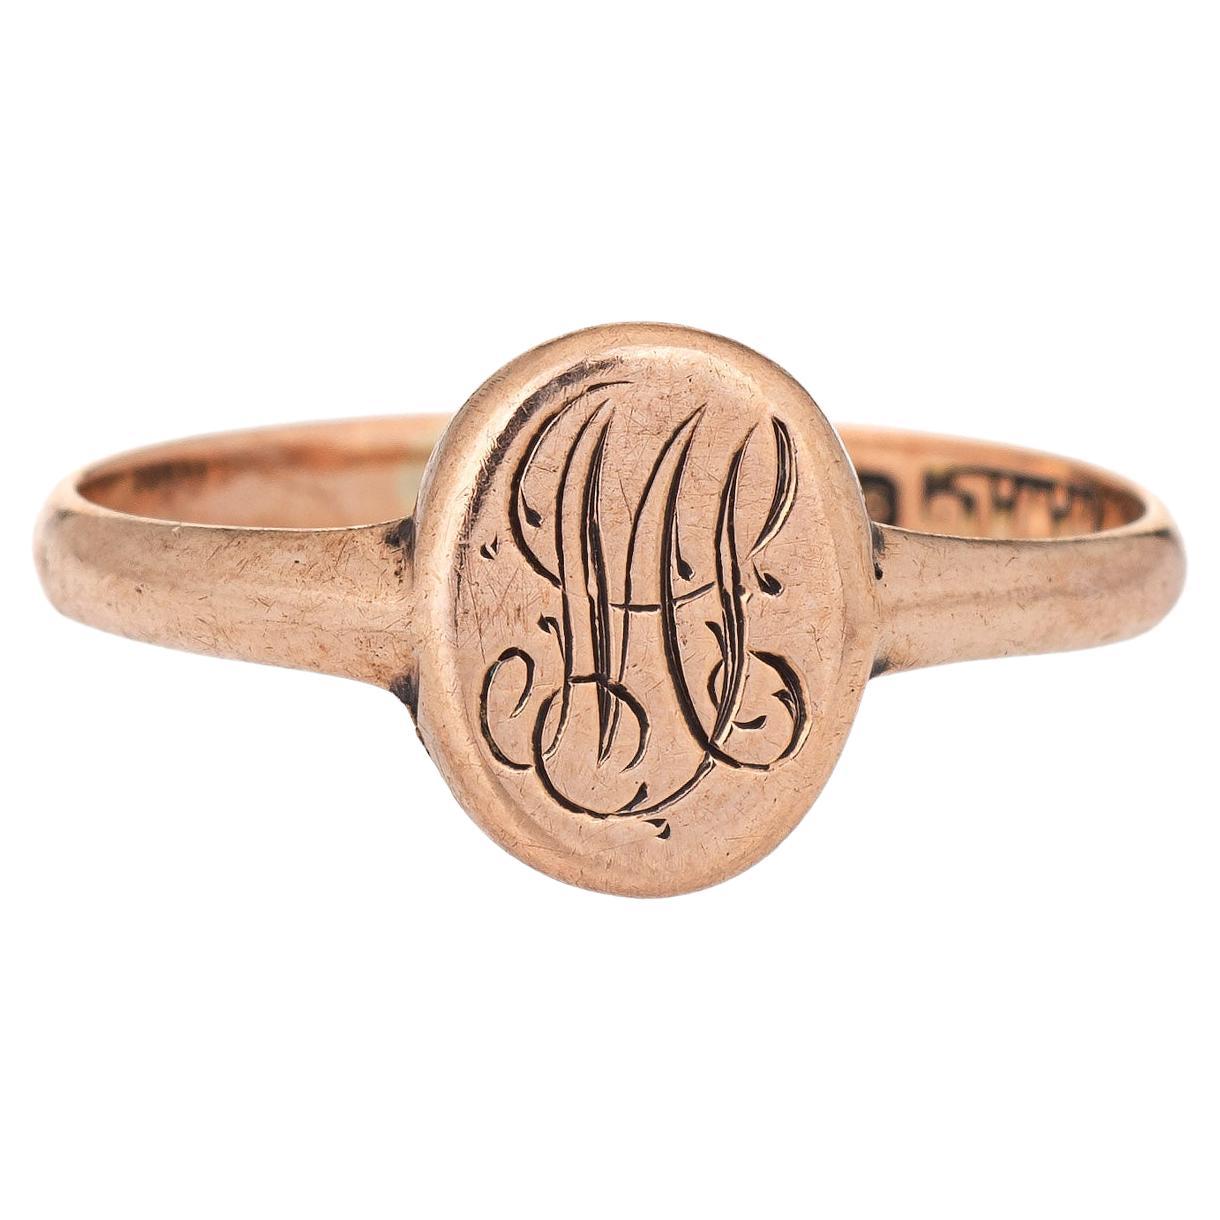 Vintage 1923 Art Deco Signet Ring Small Oval 9k Rose Gold Child Jewelry